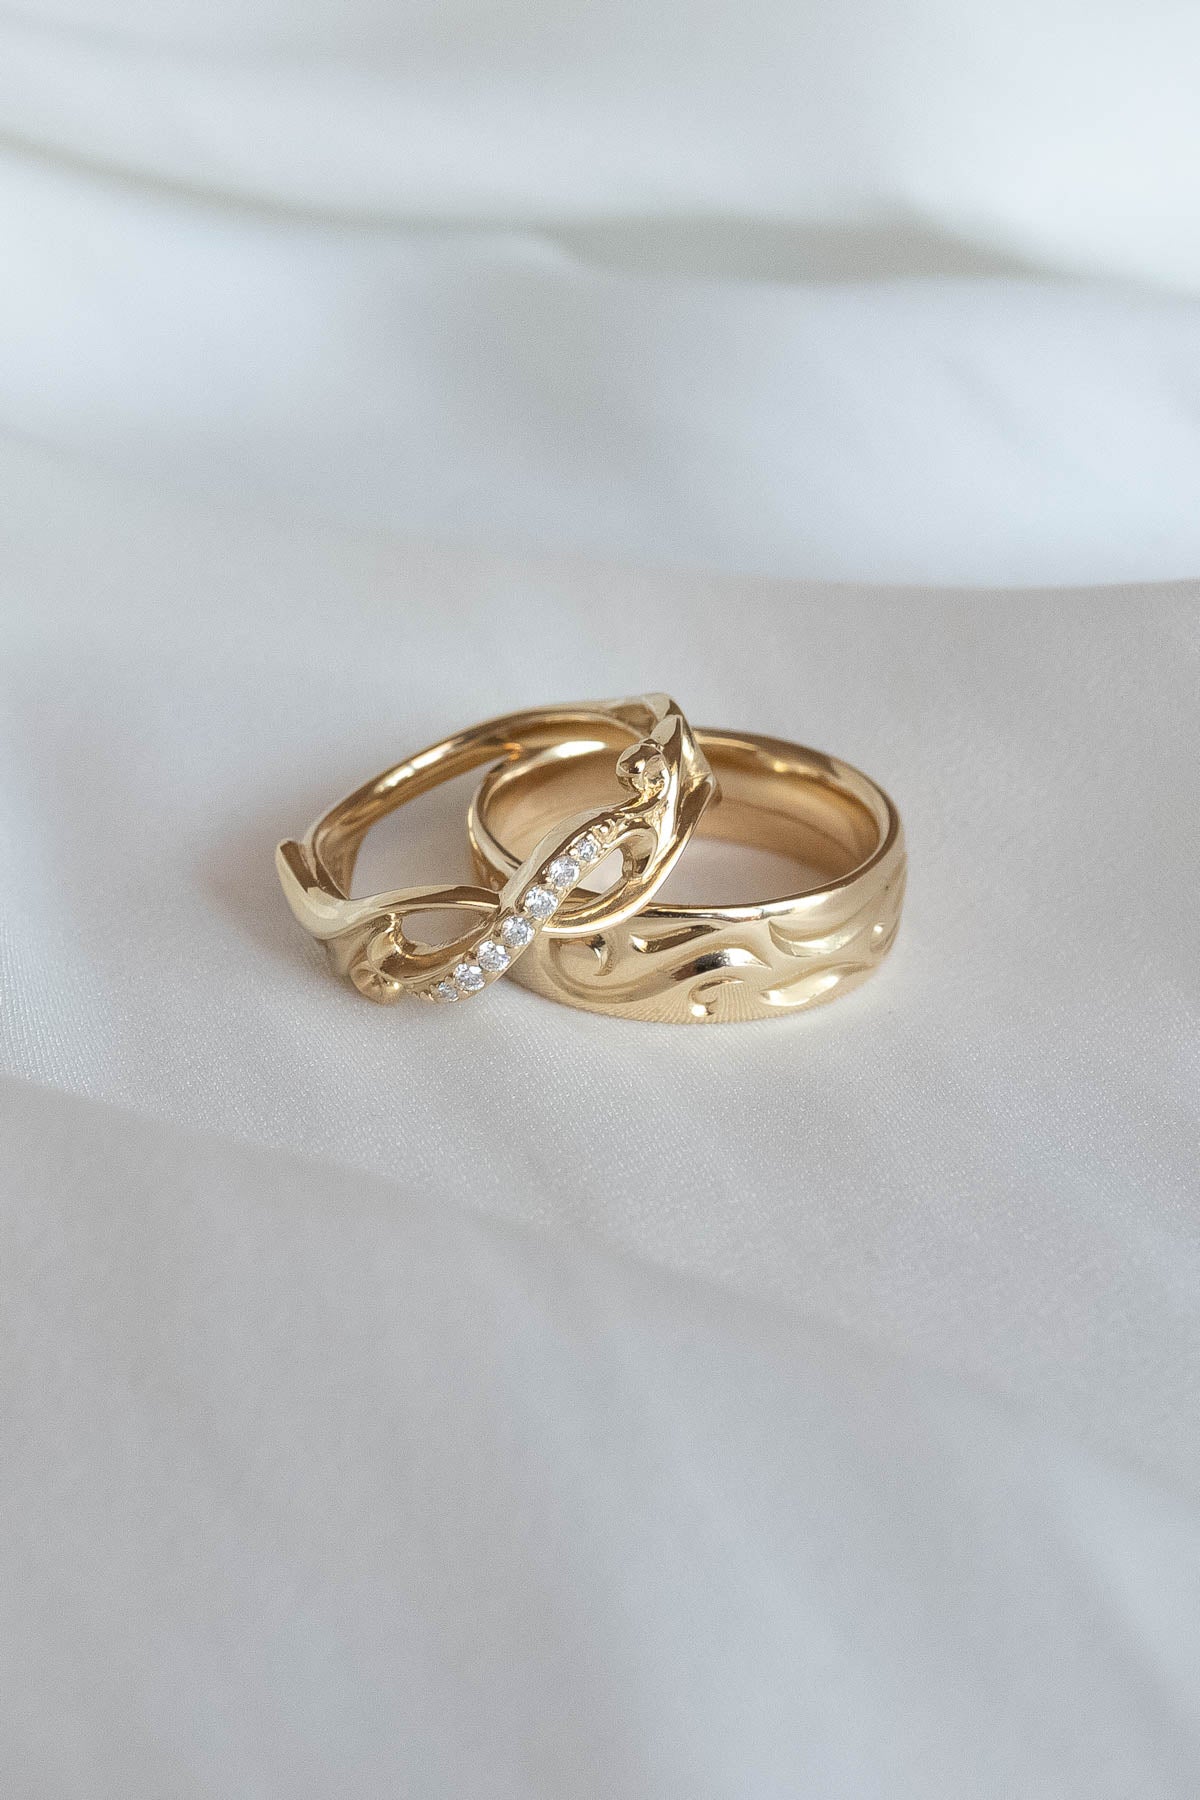 gold engagement rings for couple